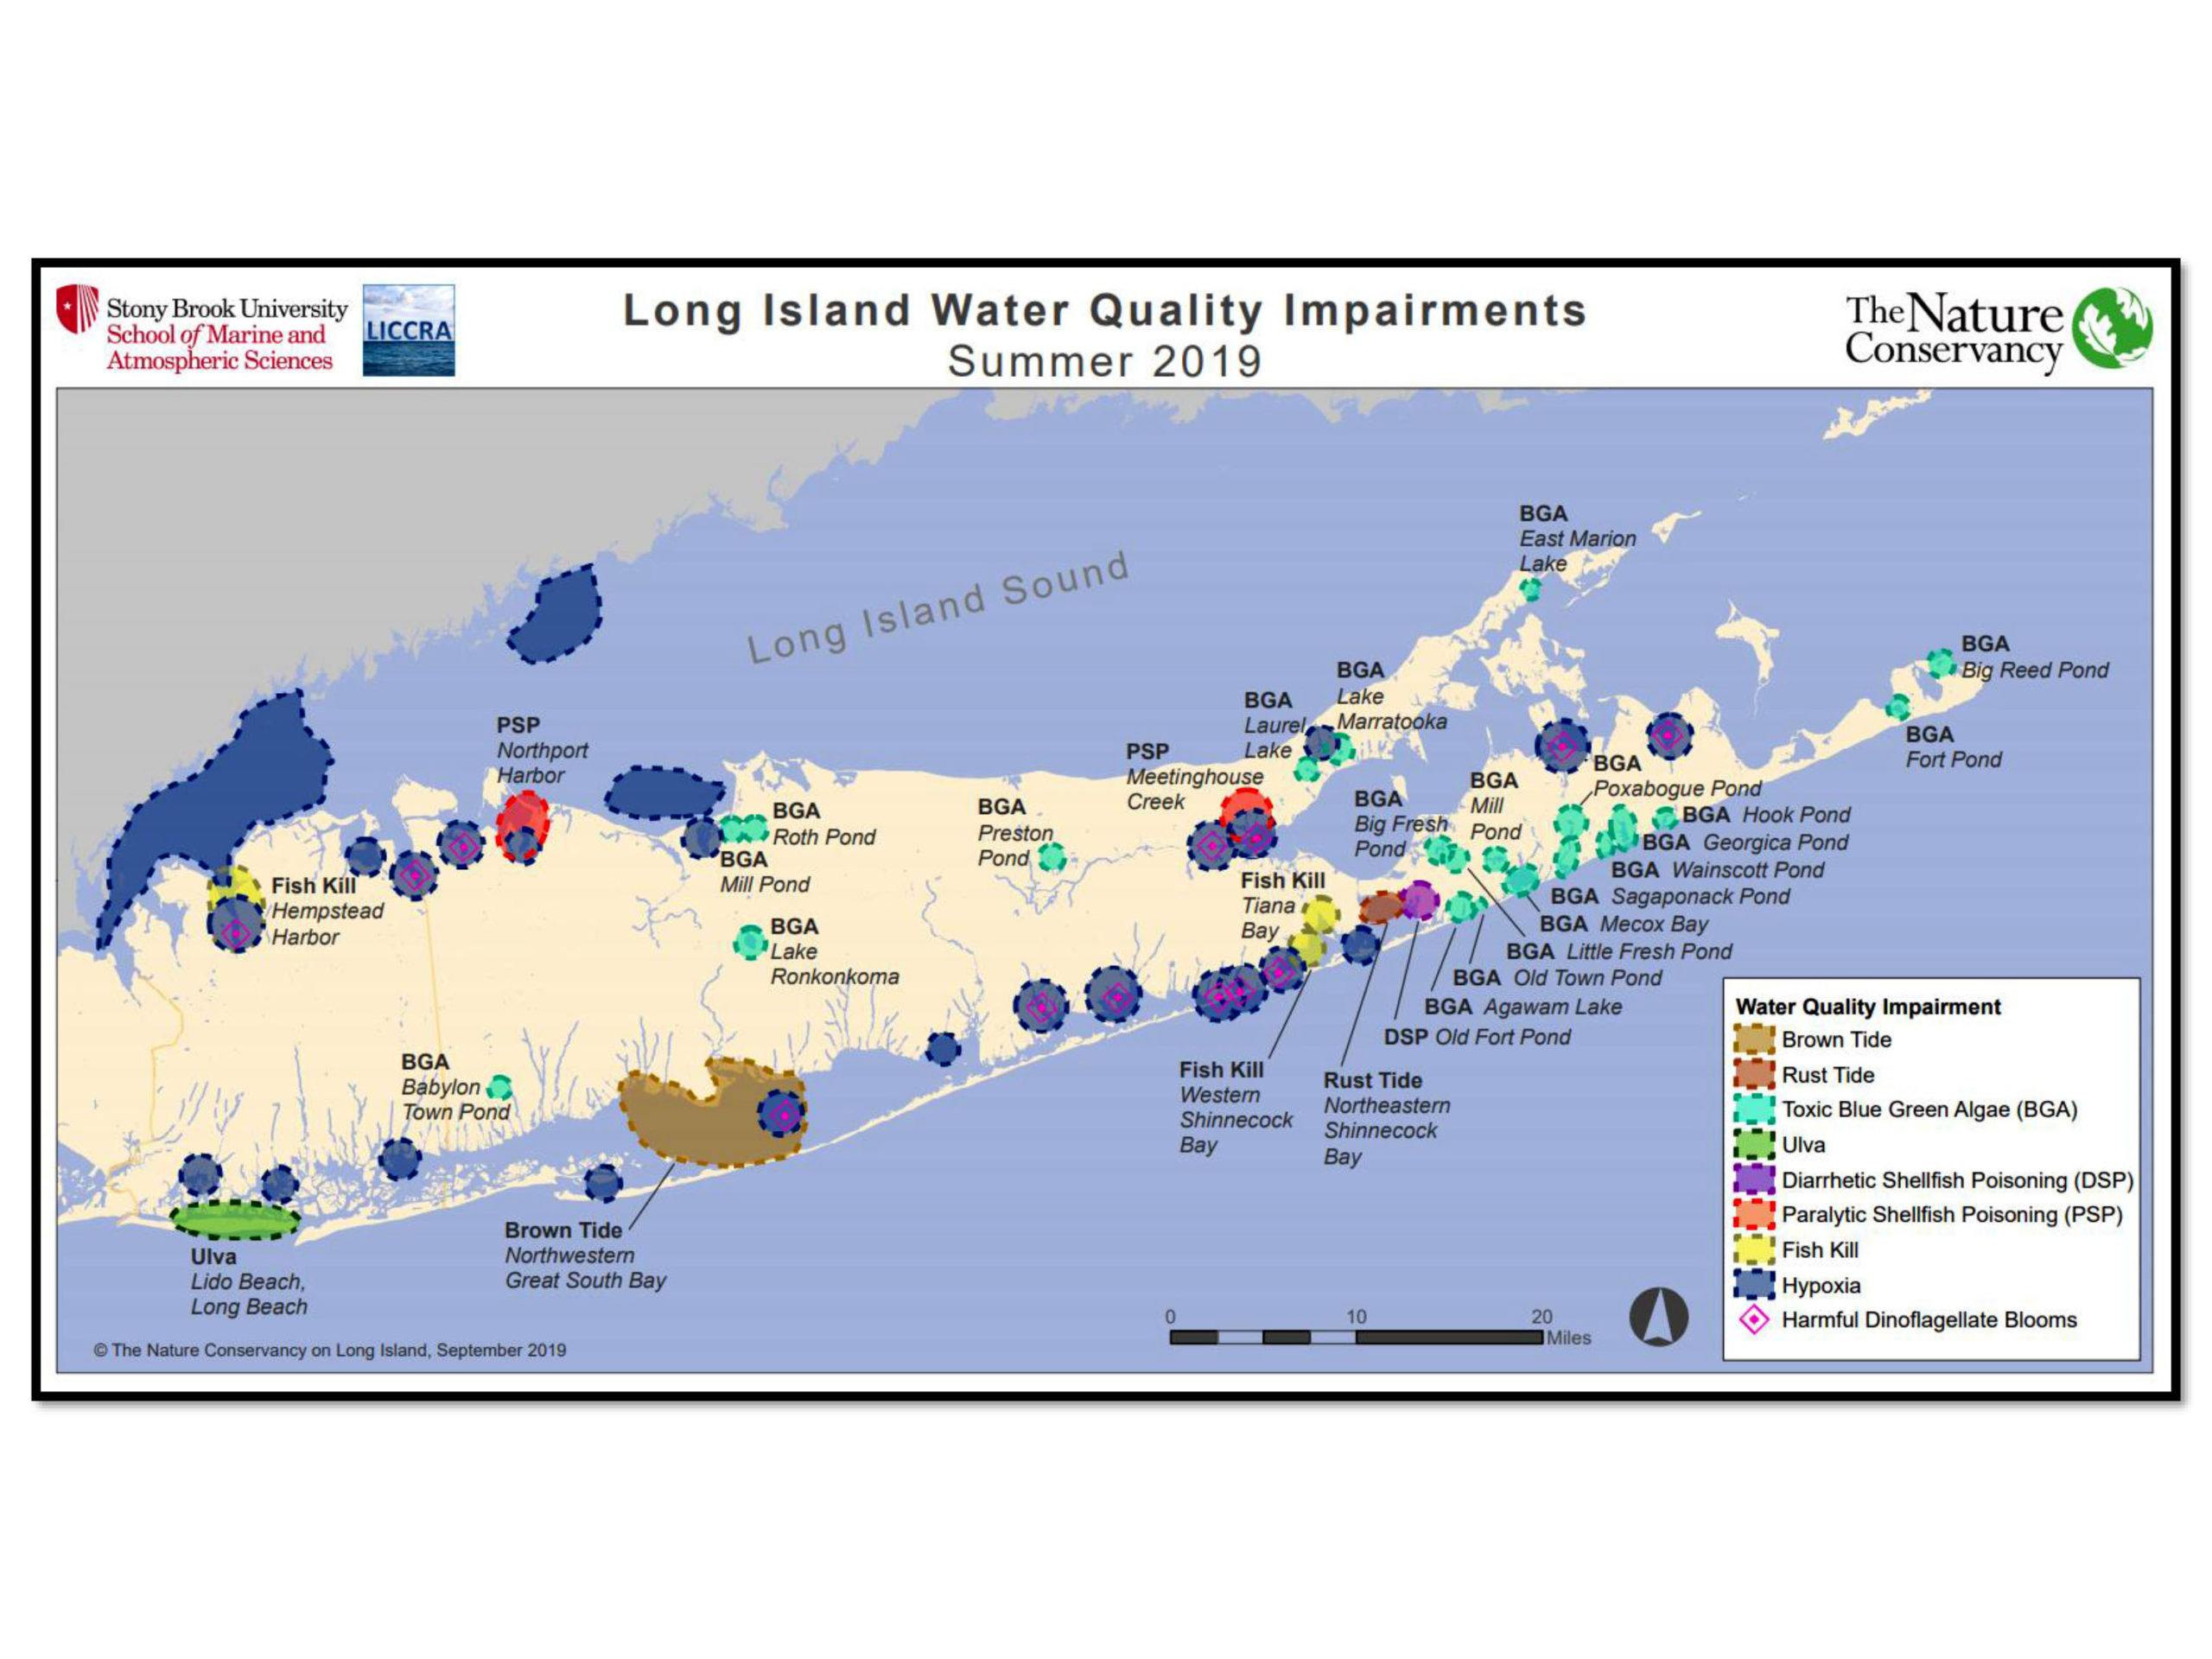 There were more than 30 harmful algae blooms and 50 total incidents of water quality crises on Long Island in 2019. 